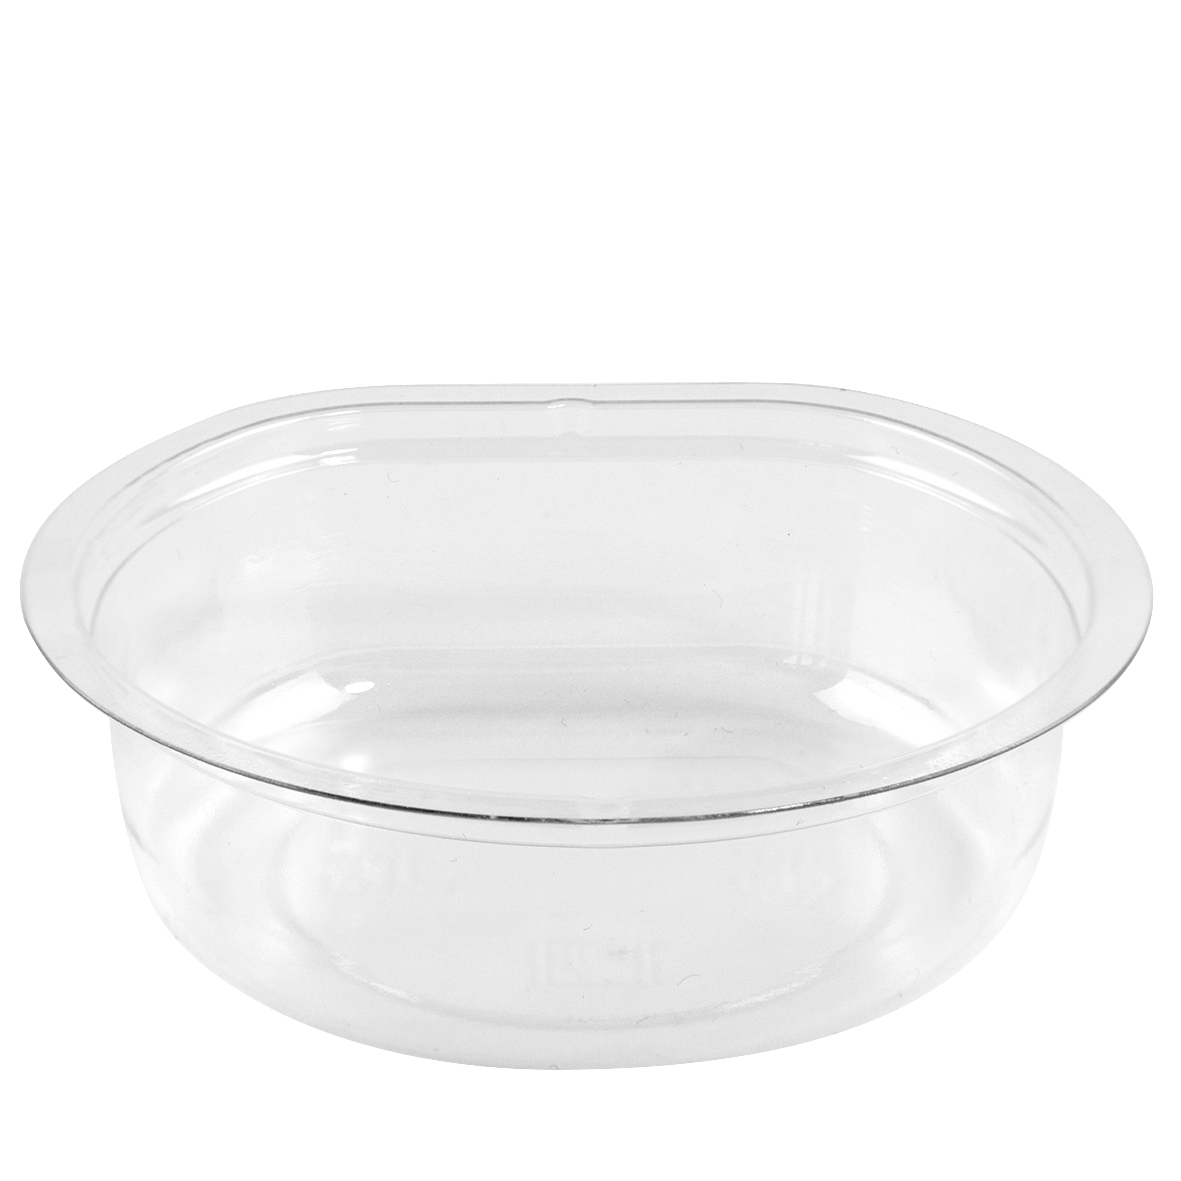 rPET Insert, 4 oz. for 12-20 oz. Cup